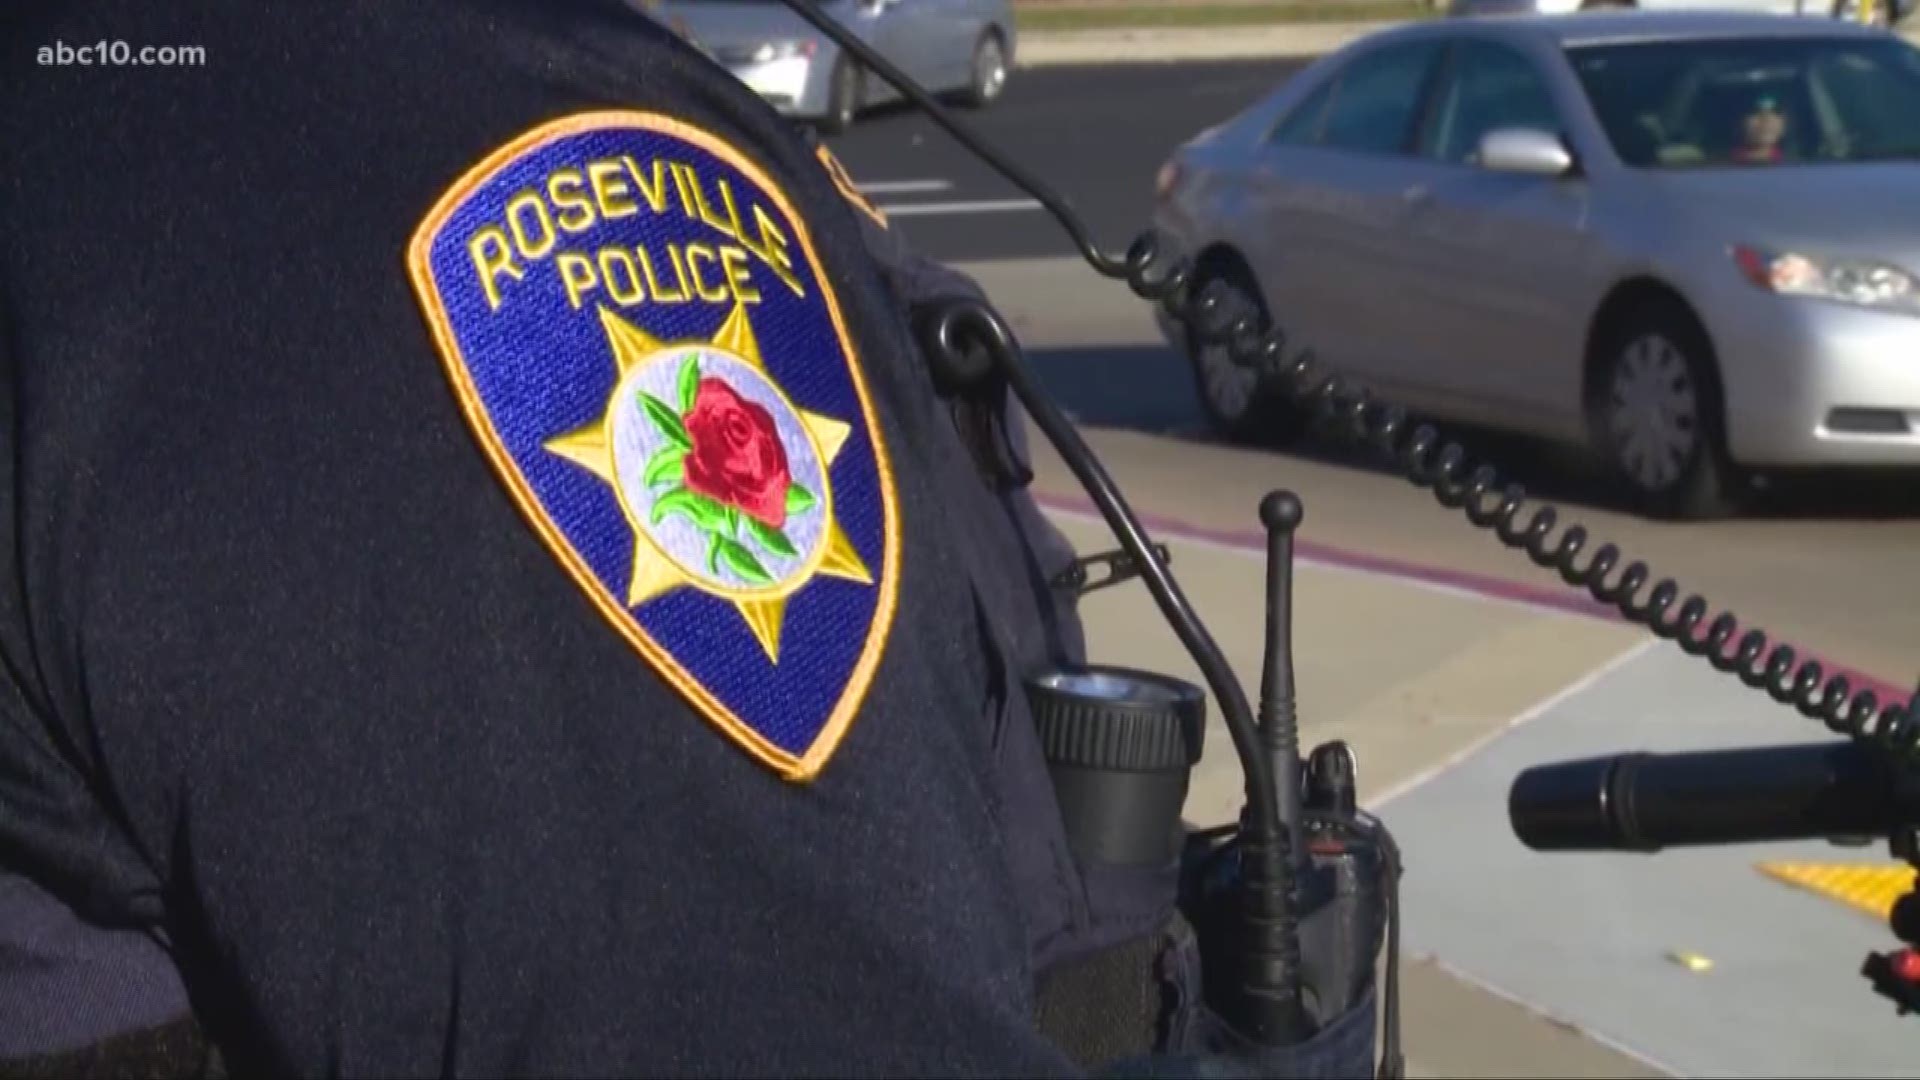 Police in Roseville are proactively increasing patrols to protect against coronavirus-related crimes, like thieves targeting closed businesses and the like.